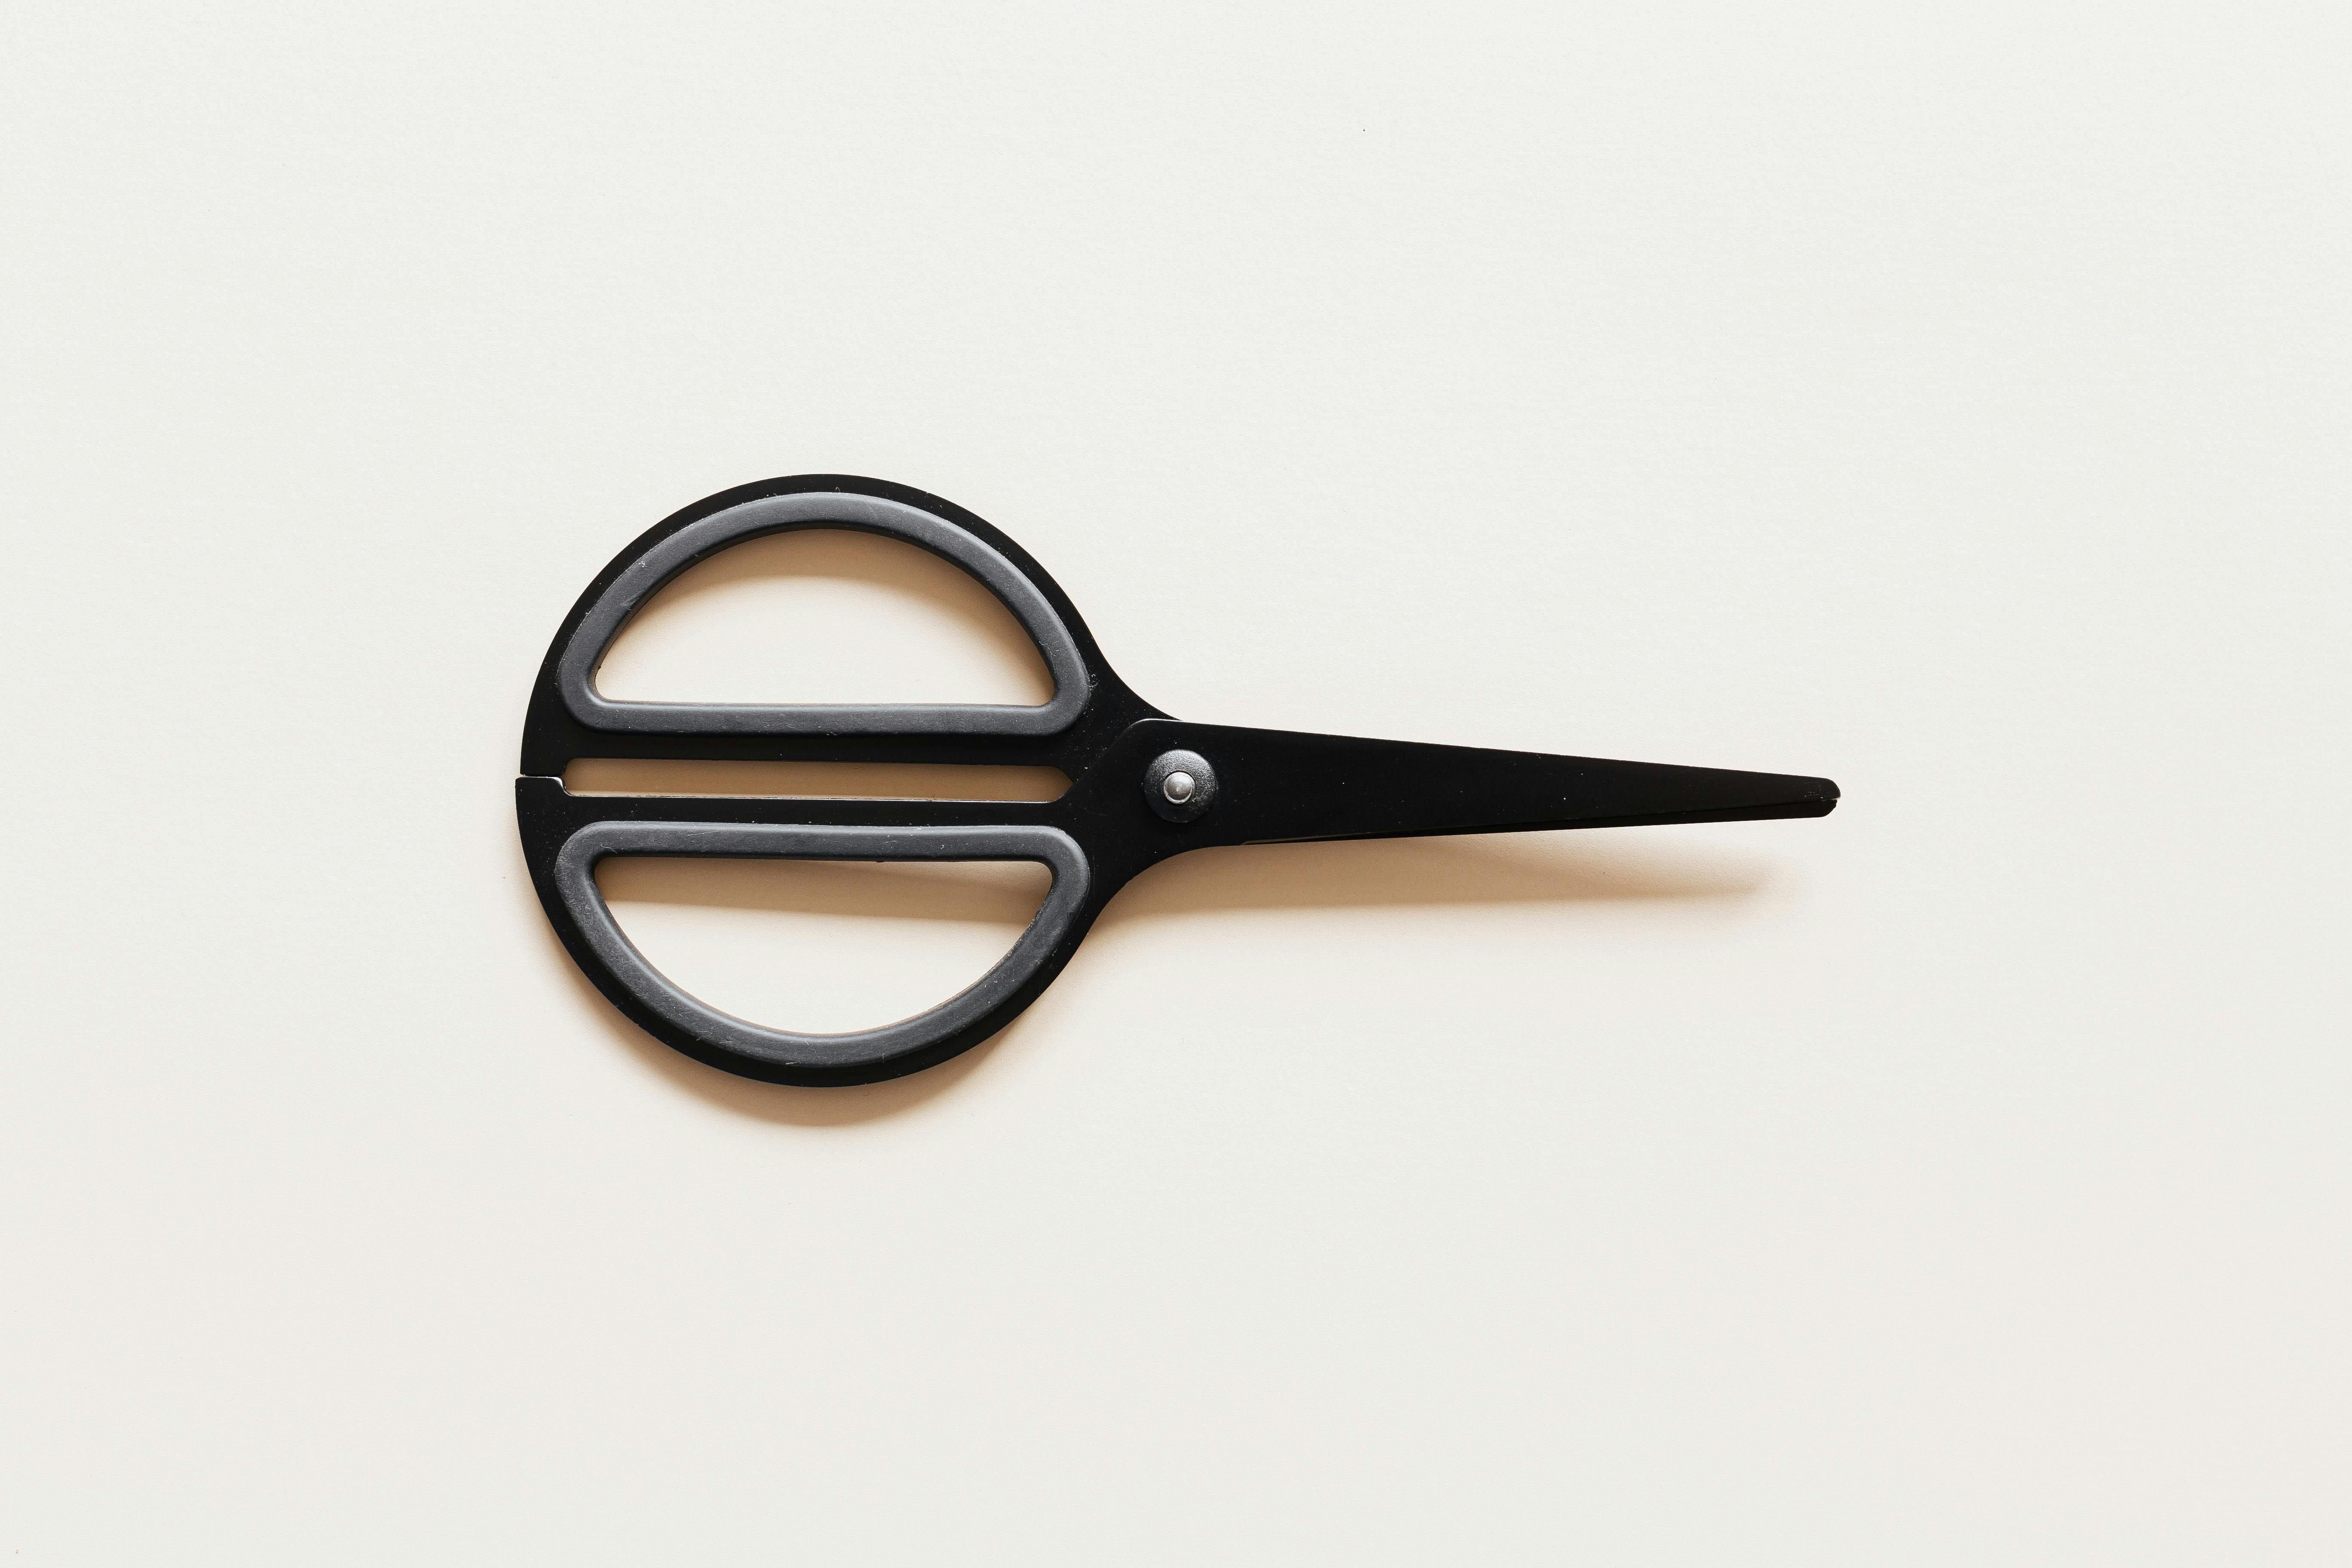 176,854 Black Scissors Royalty-Free Images, Stock Photos & Pictures